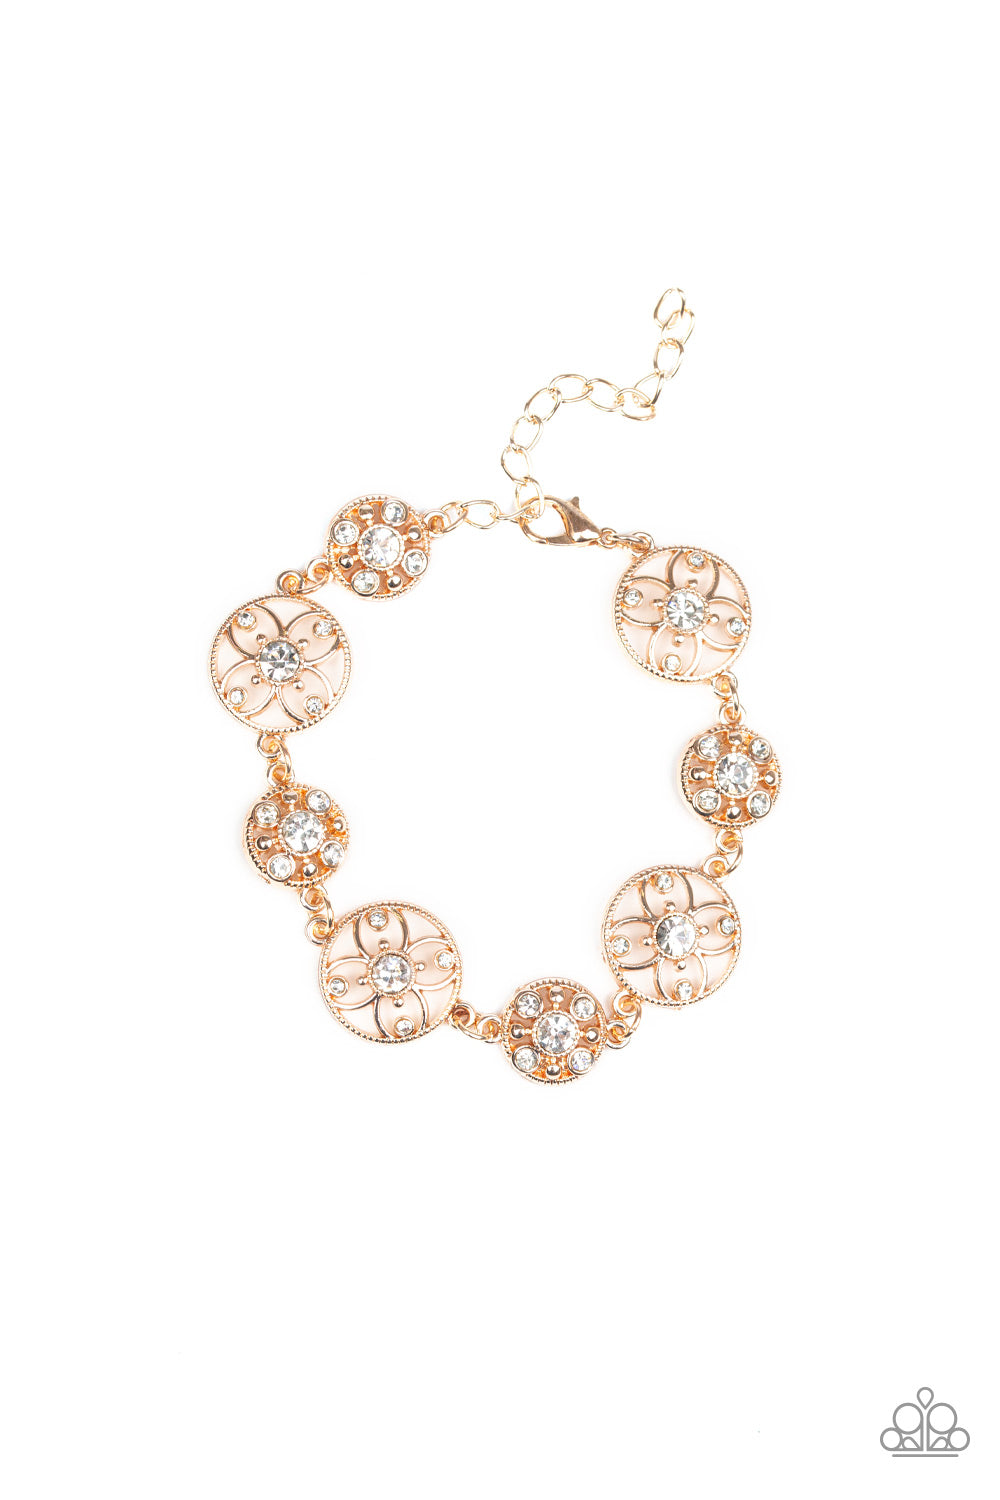 FLORAL FLORESCENCE AND FLOWERY FASHION - ROSE GOLD SET